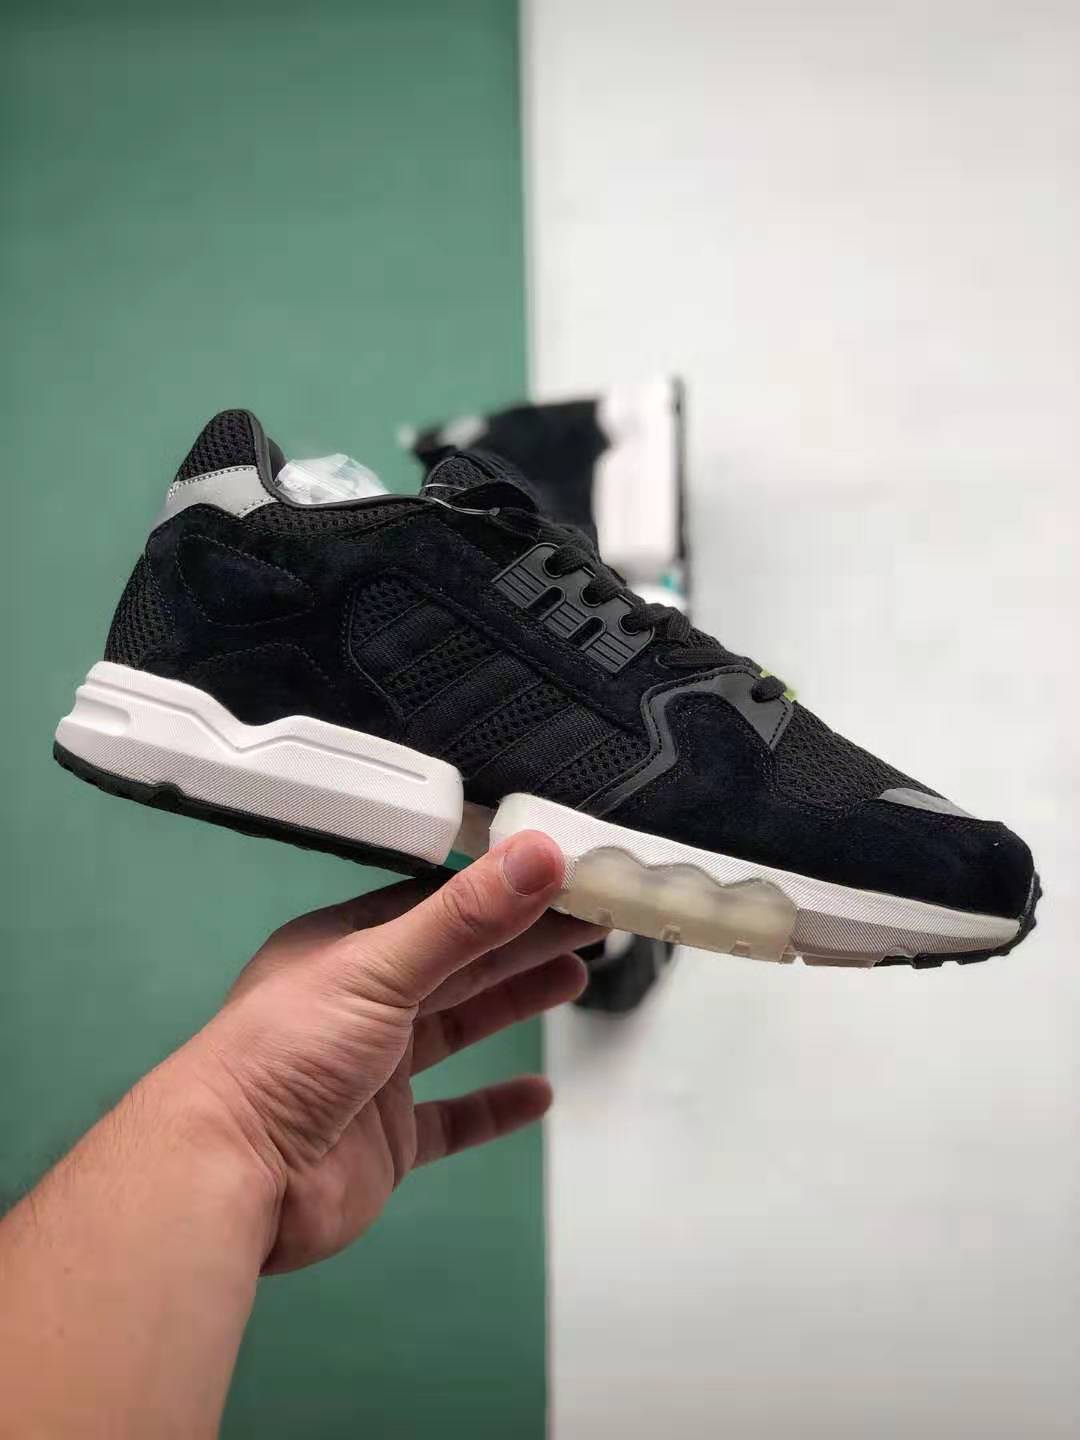 Adidas ZX Torsion Core Black - Stylish Athletic Sneaker | Free Shipping